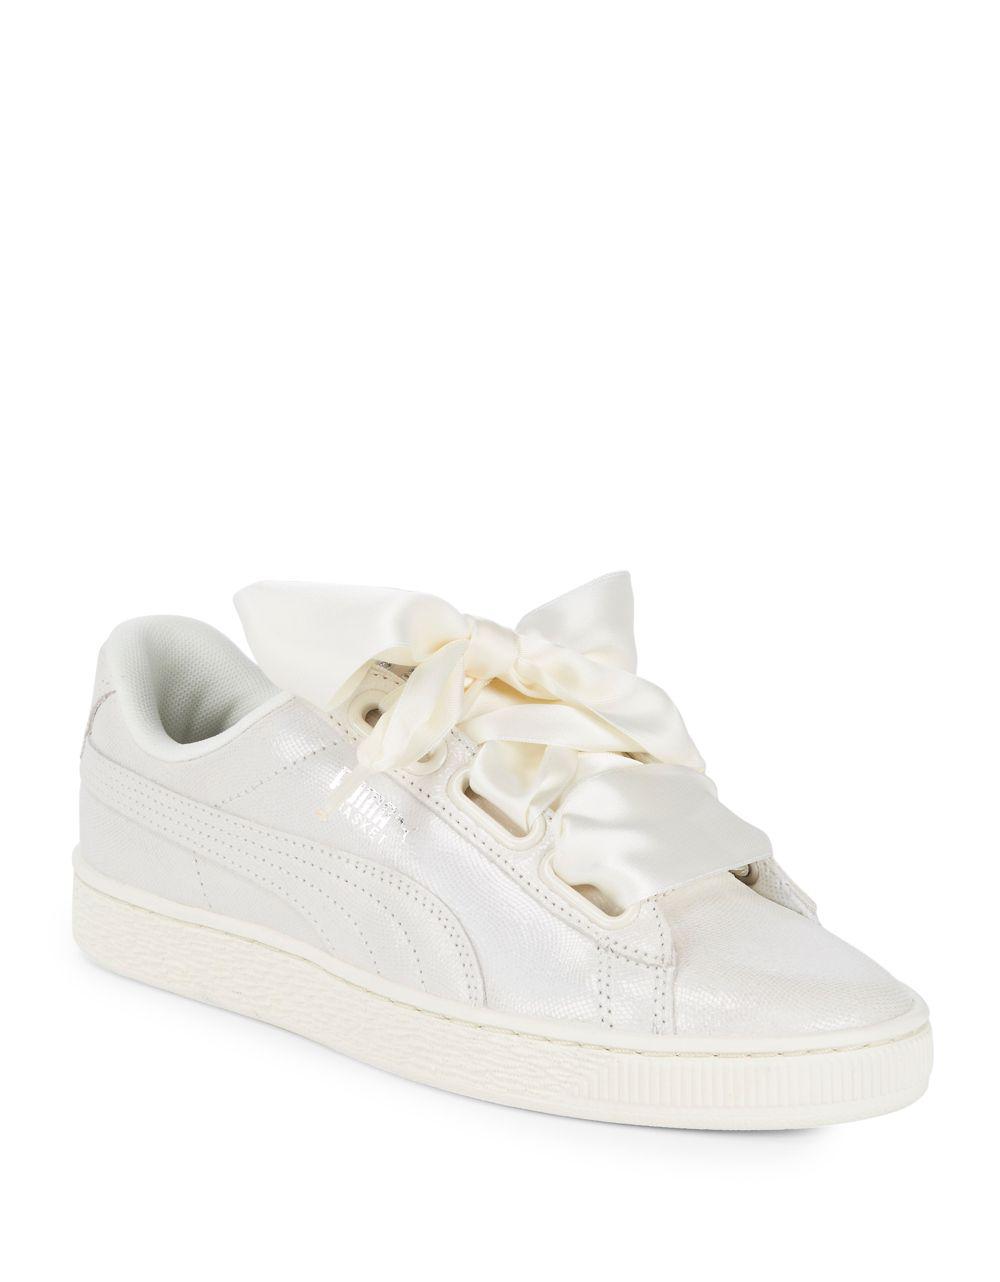 white pumas with ribbon laces